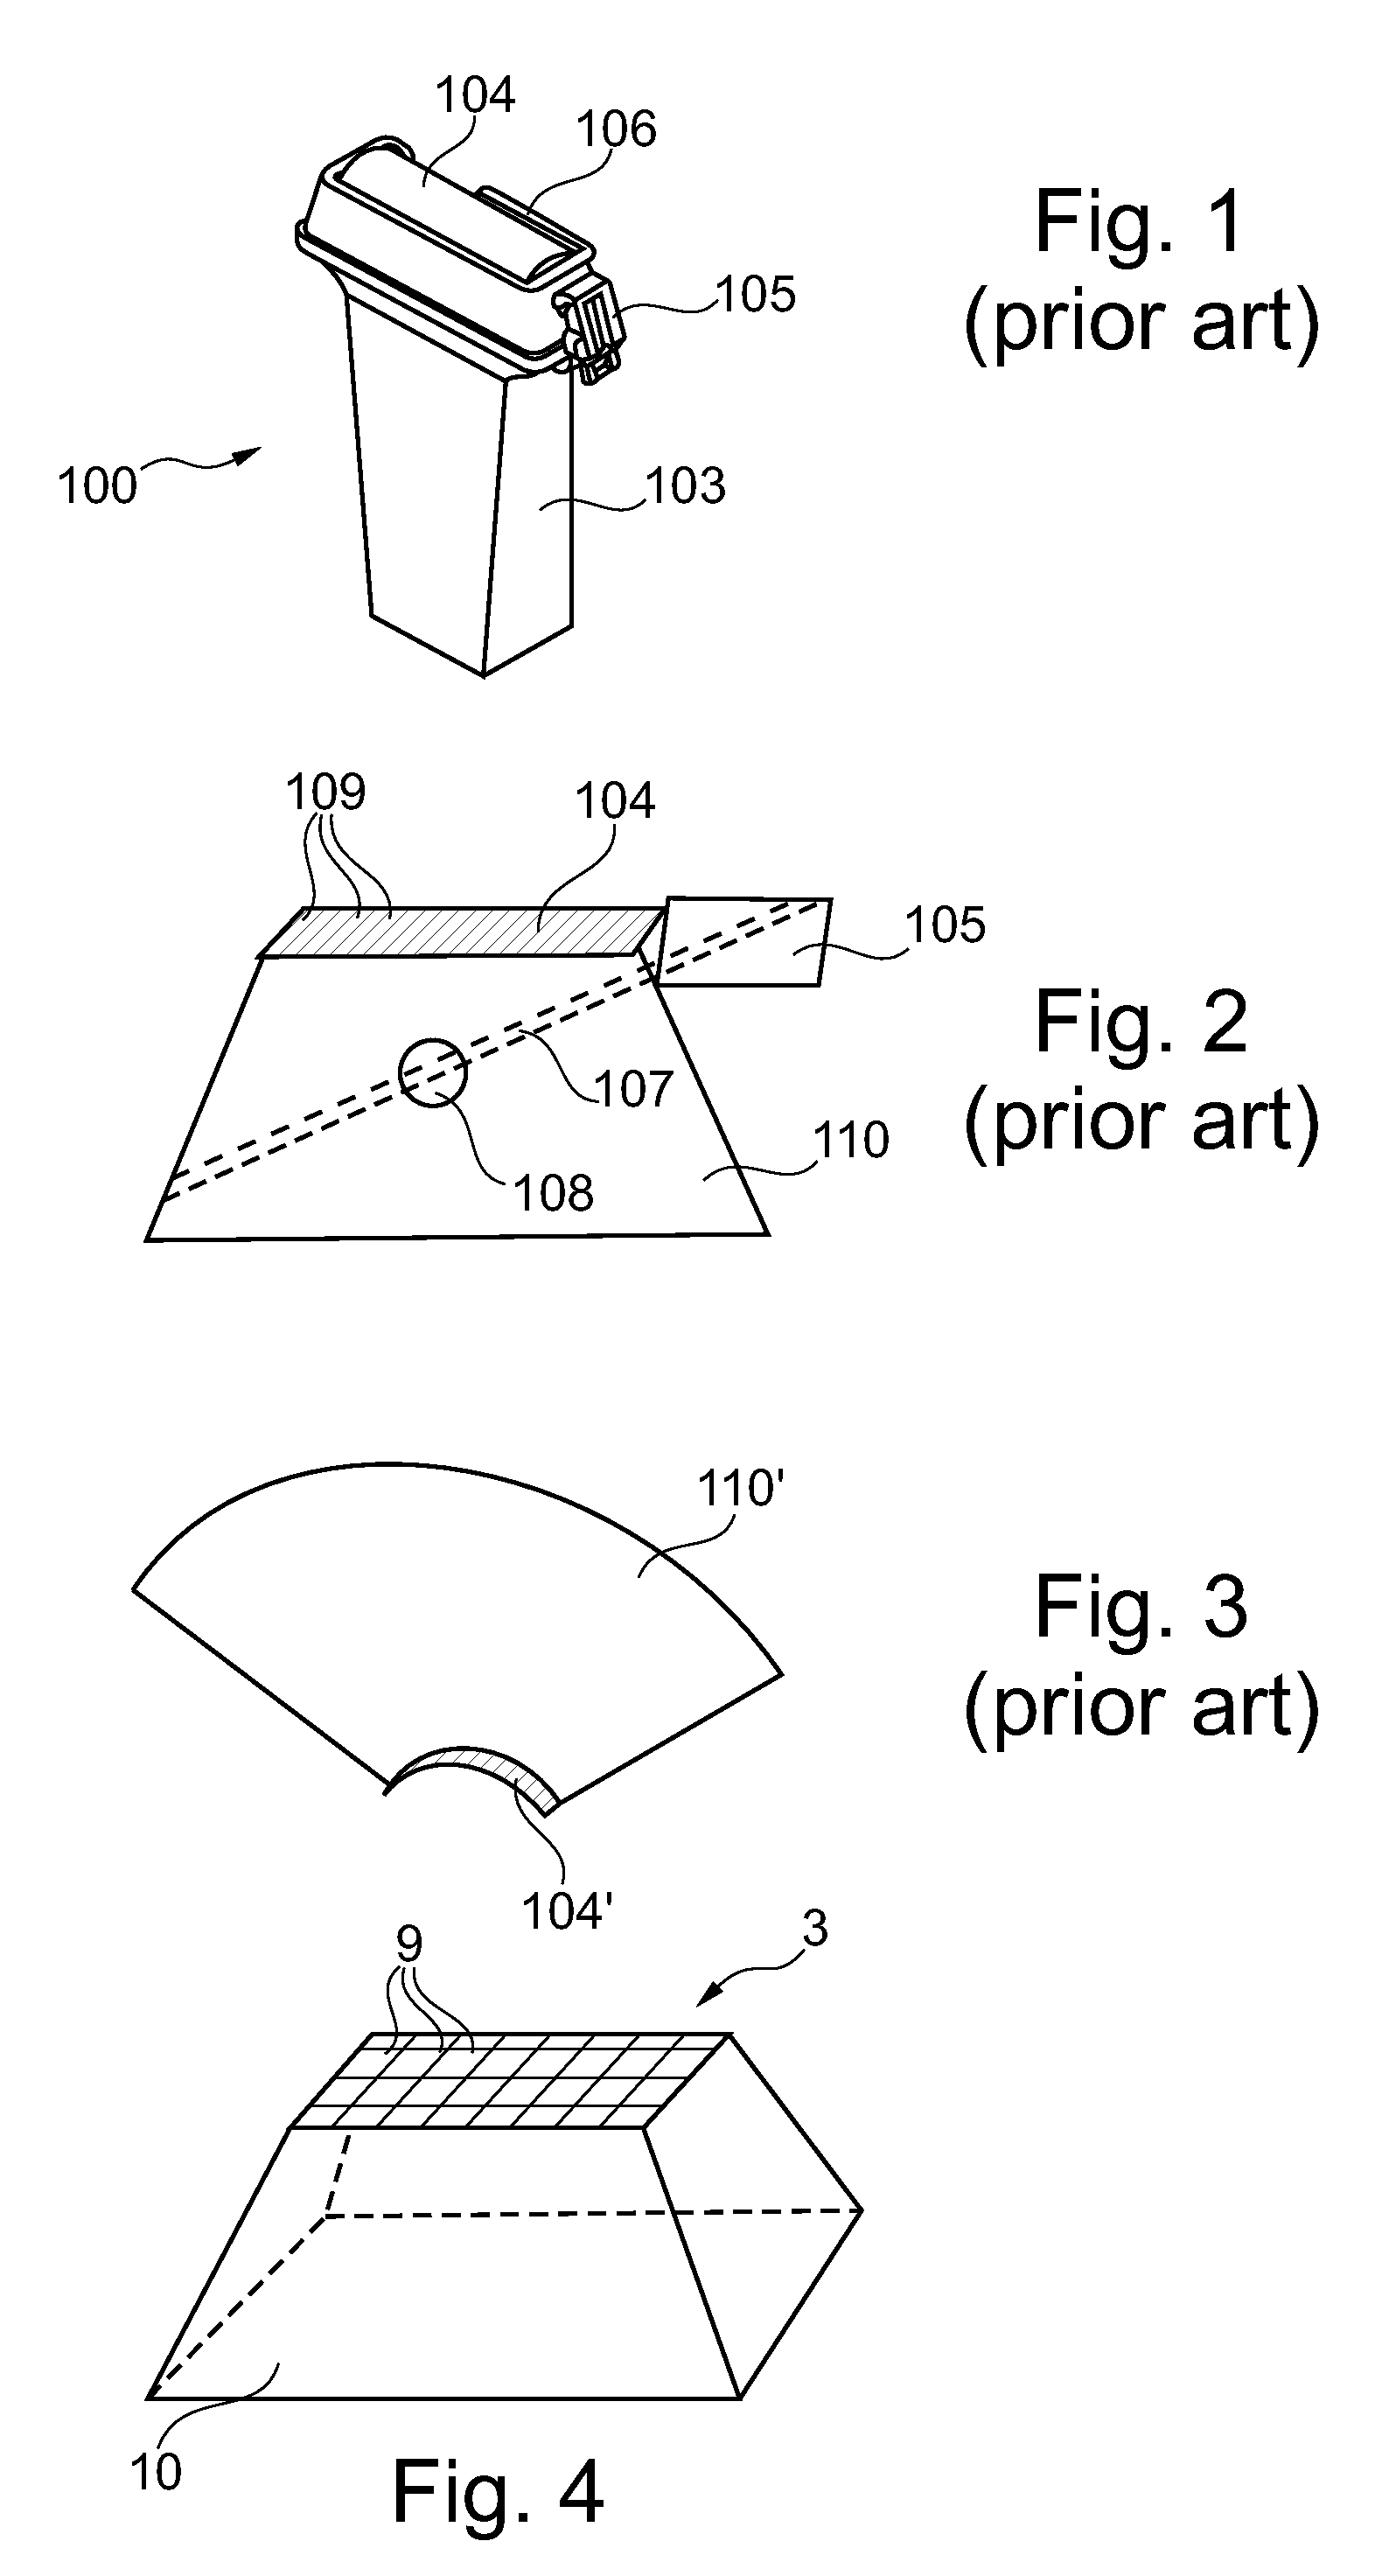 Biopsy guide with an ultrasound transducer and method of using same